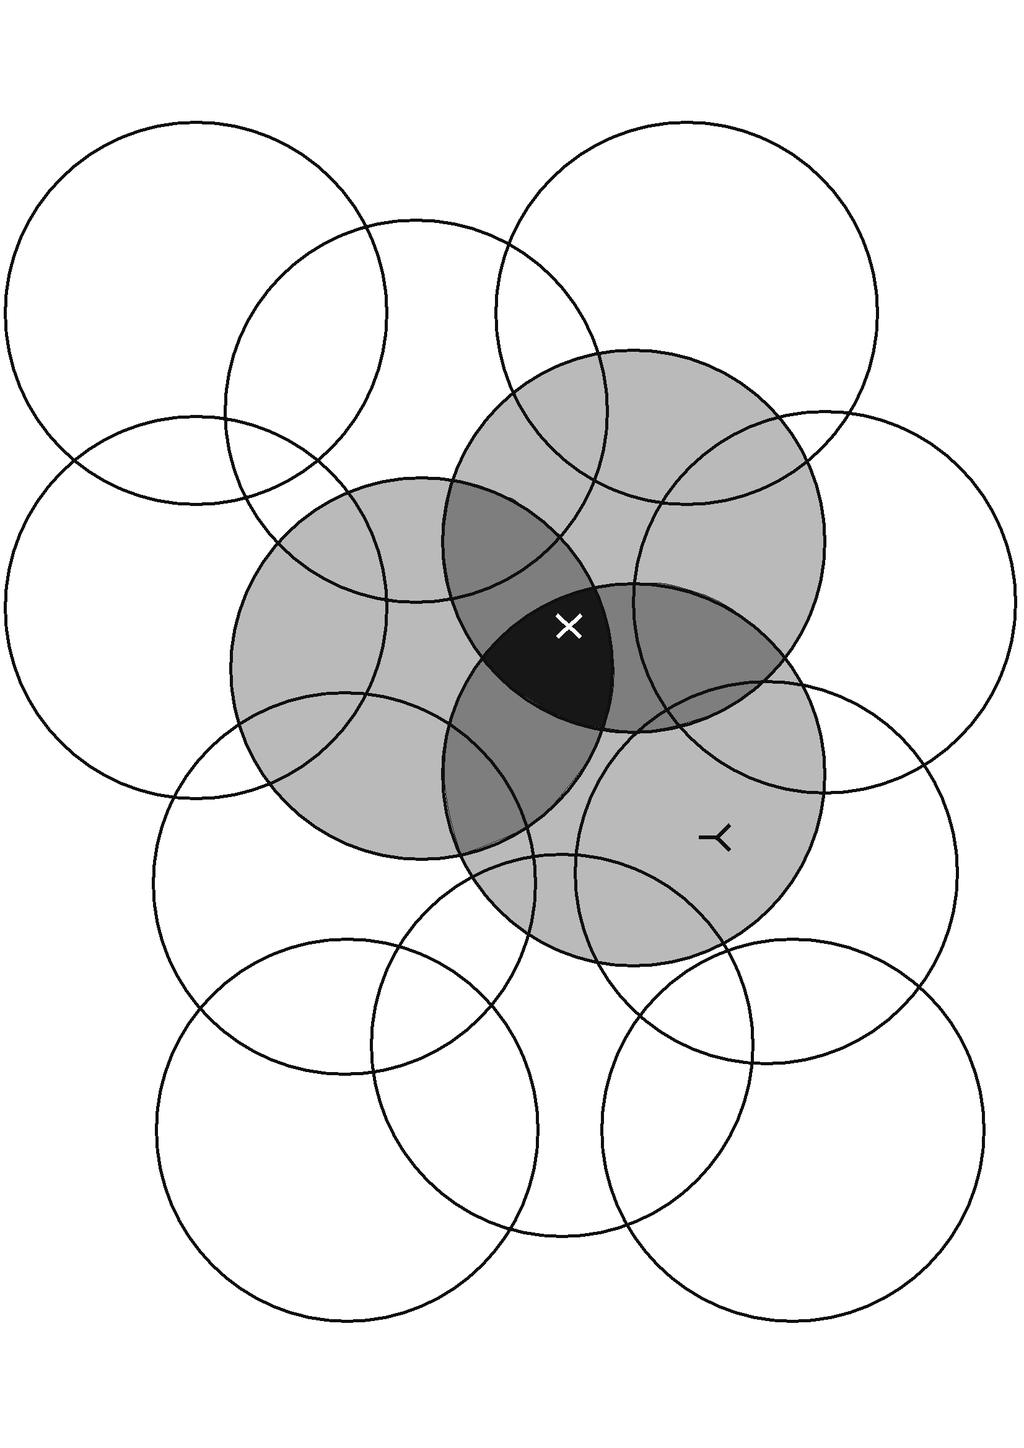 Coarse coding using RBFs Each circle is a Radial Basis Function (center c and a width σ) that represents a feature.